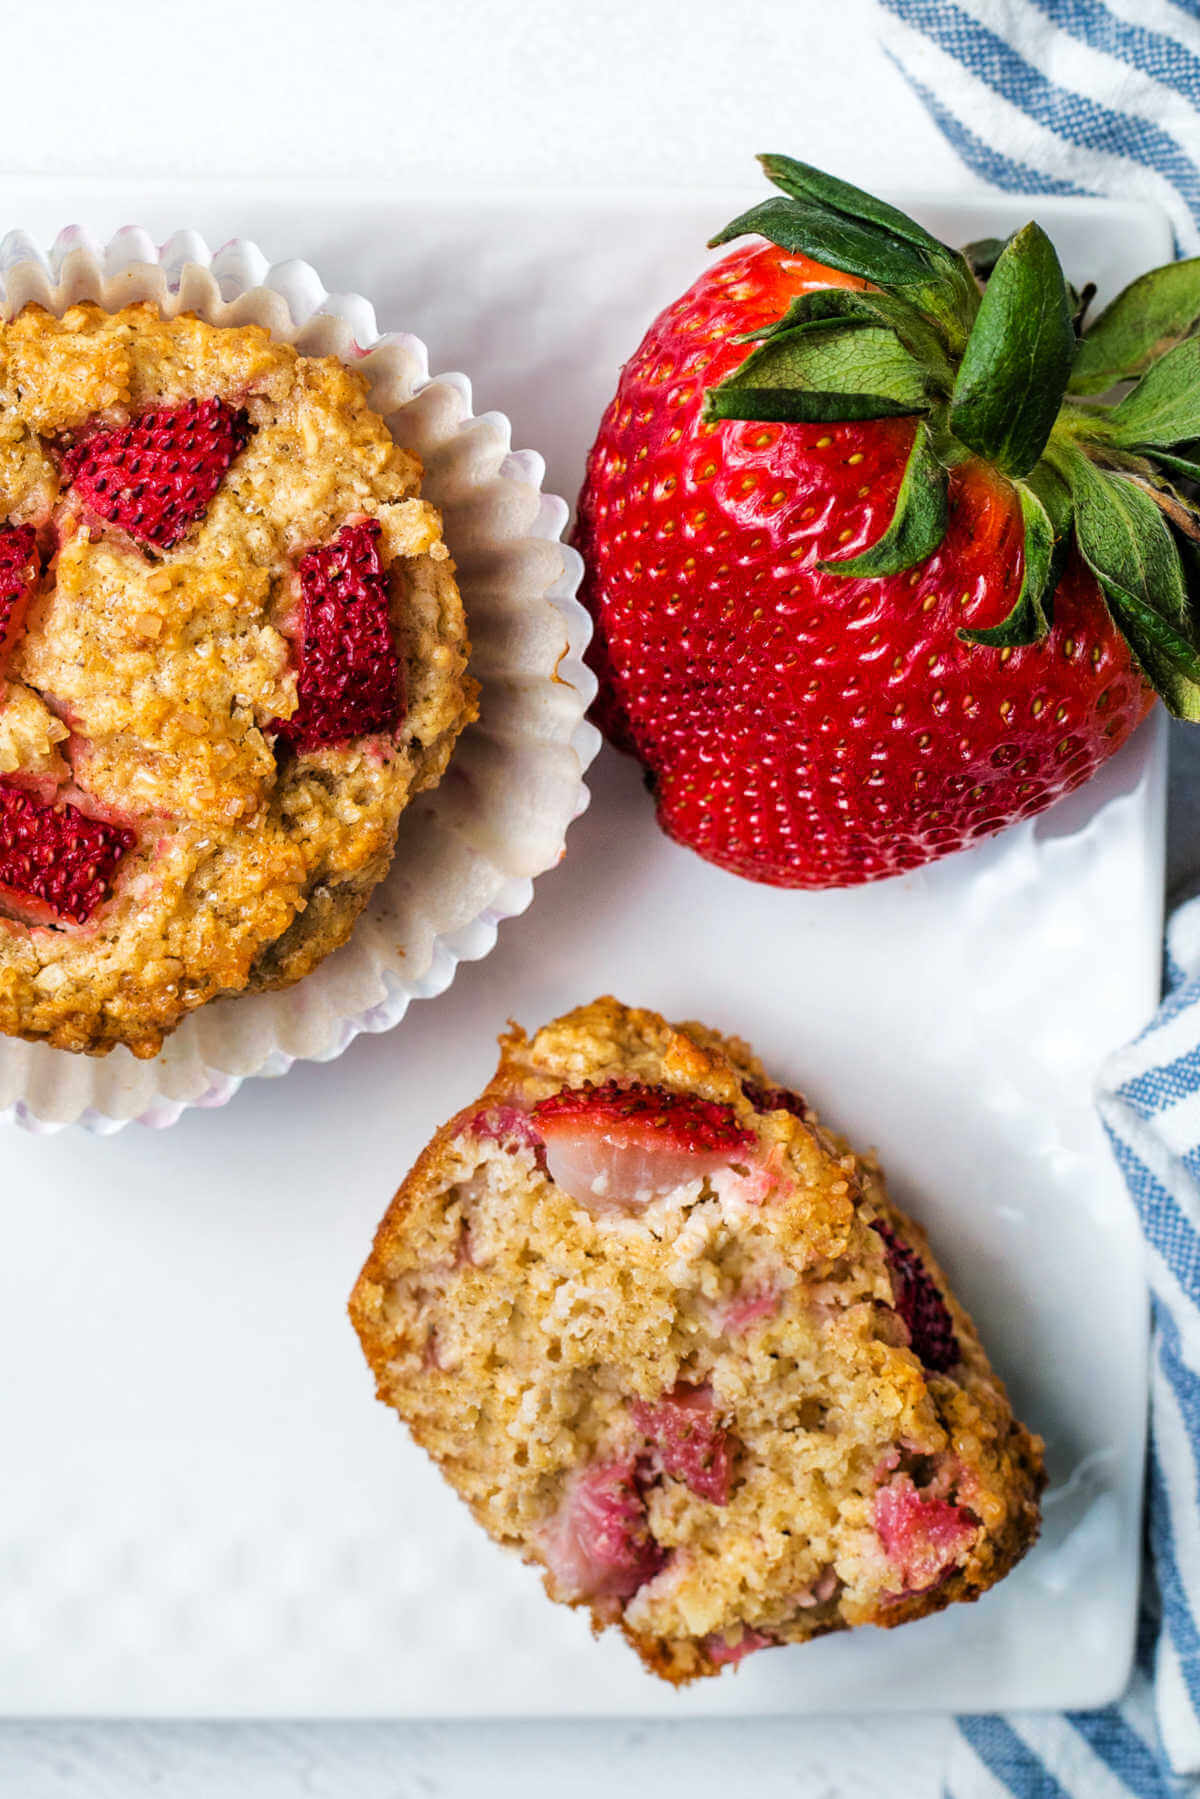 a strawberry oat muffin torn in half on a plate with a strawberry garnish.